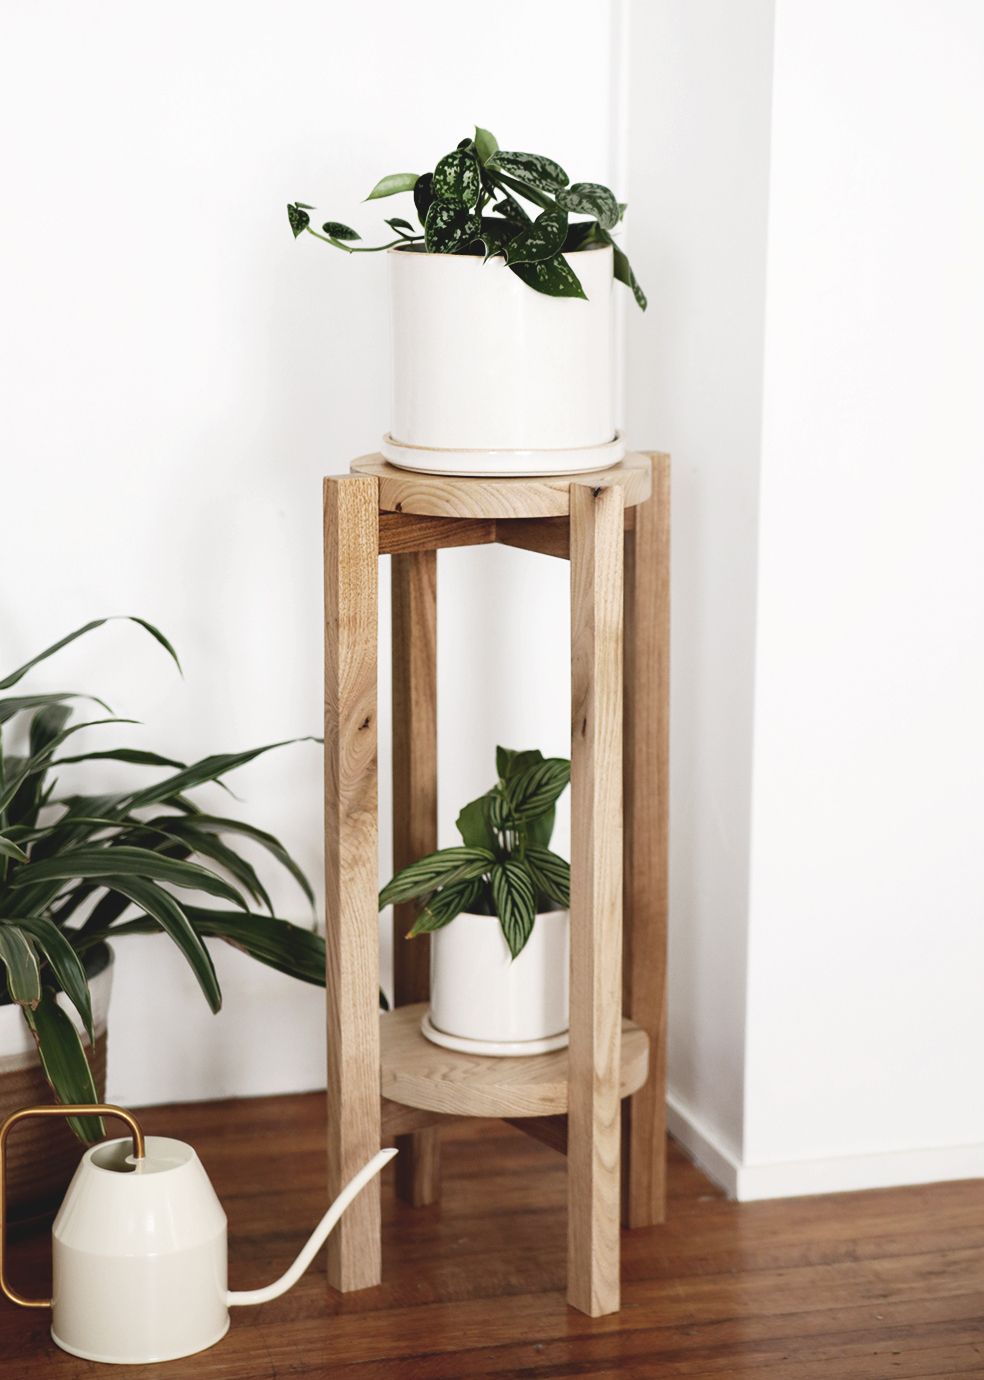 Diy Wood Plant Stand – A Simple Diy With A Video Tutorial Pertaining To Popular Wood Plant Stands (View 7 of 15)